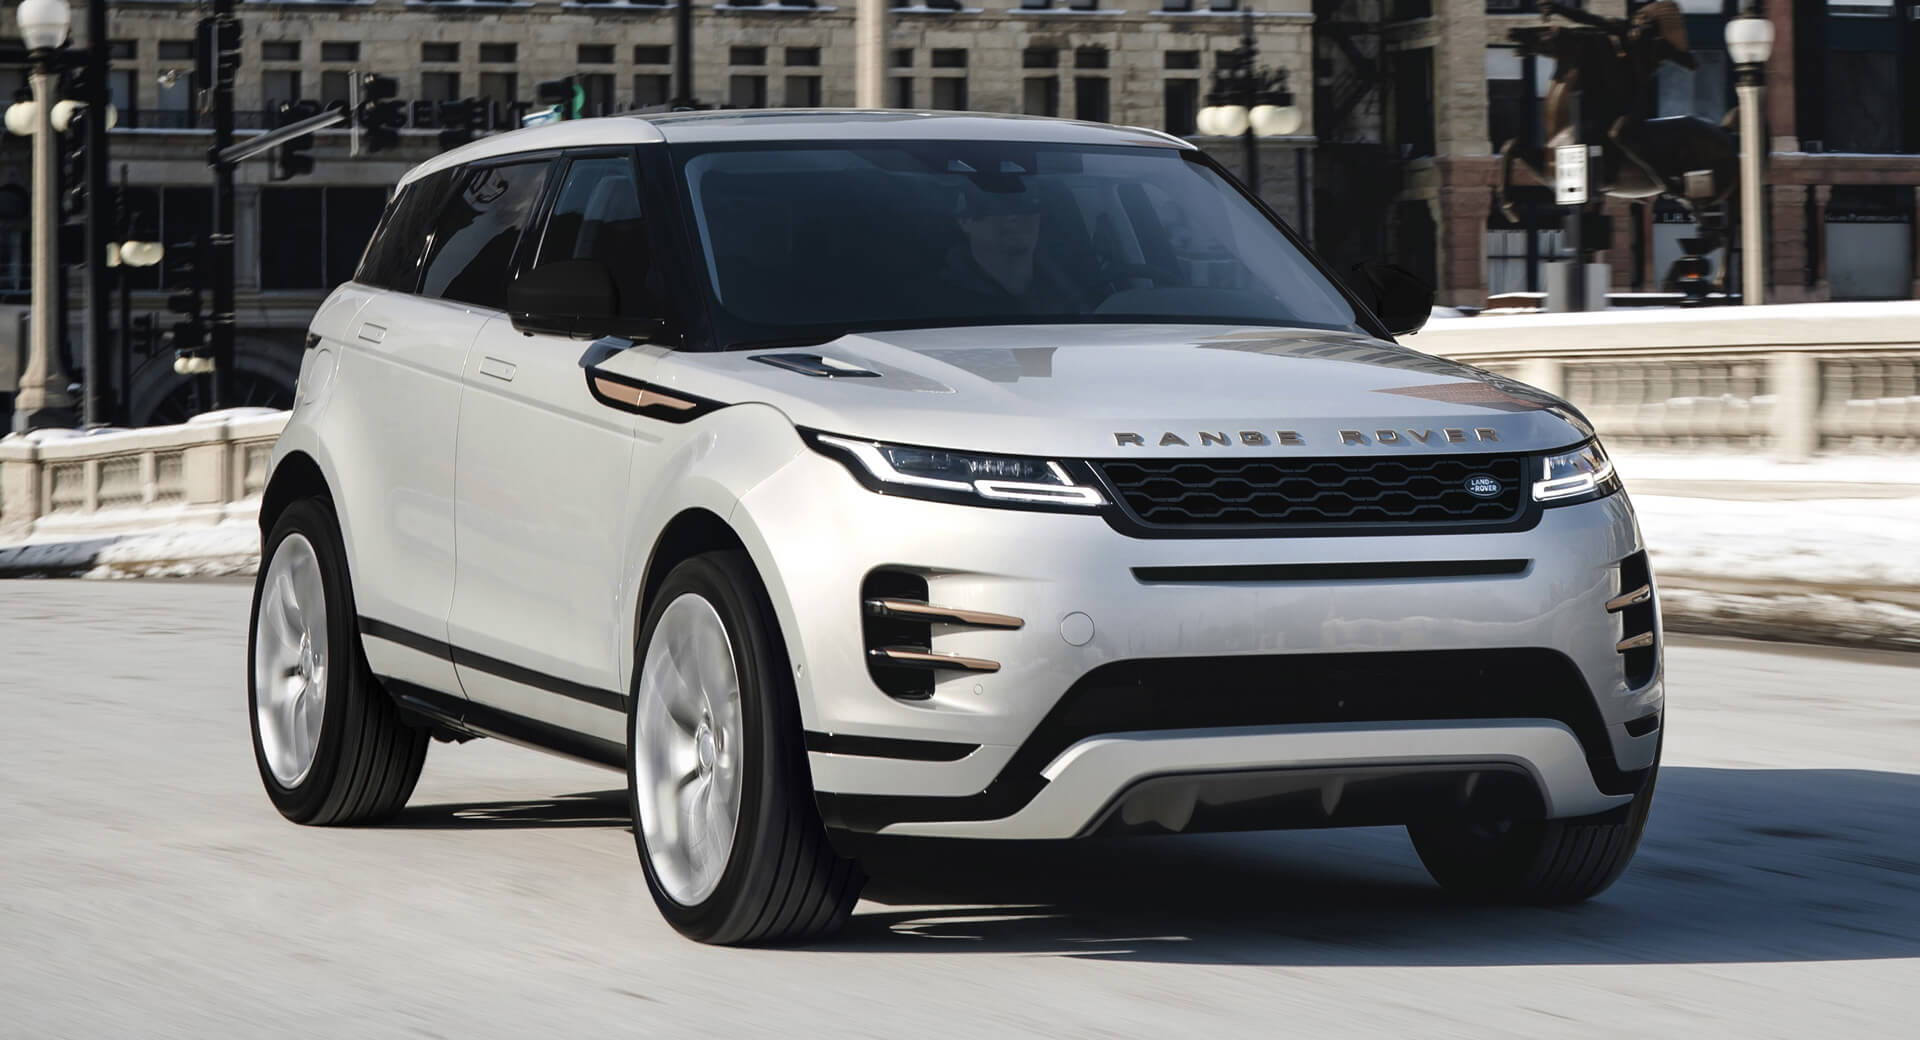 2021 Land Rover Range Rover Evoque Review, Pricing, & Pictures